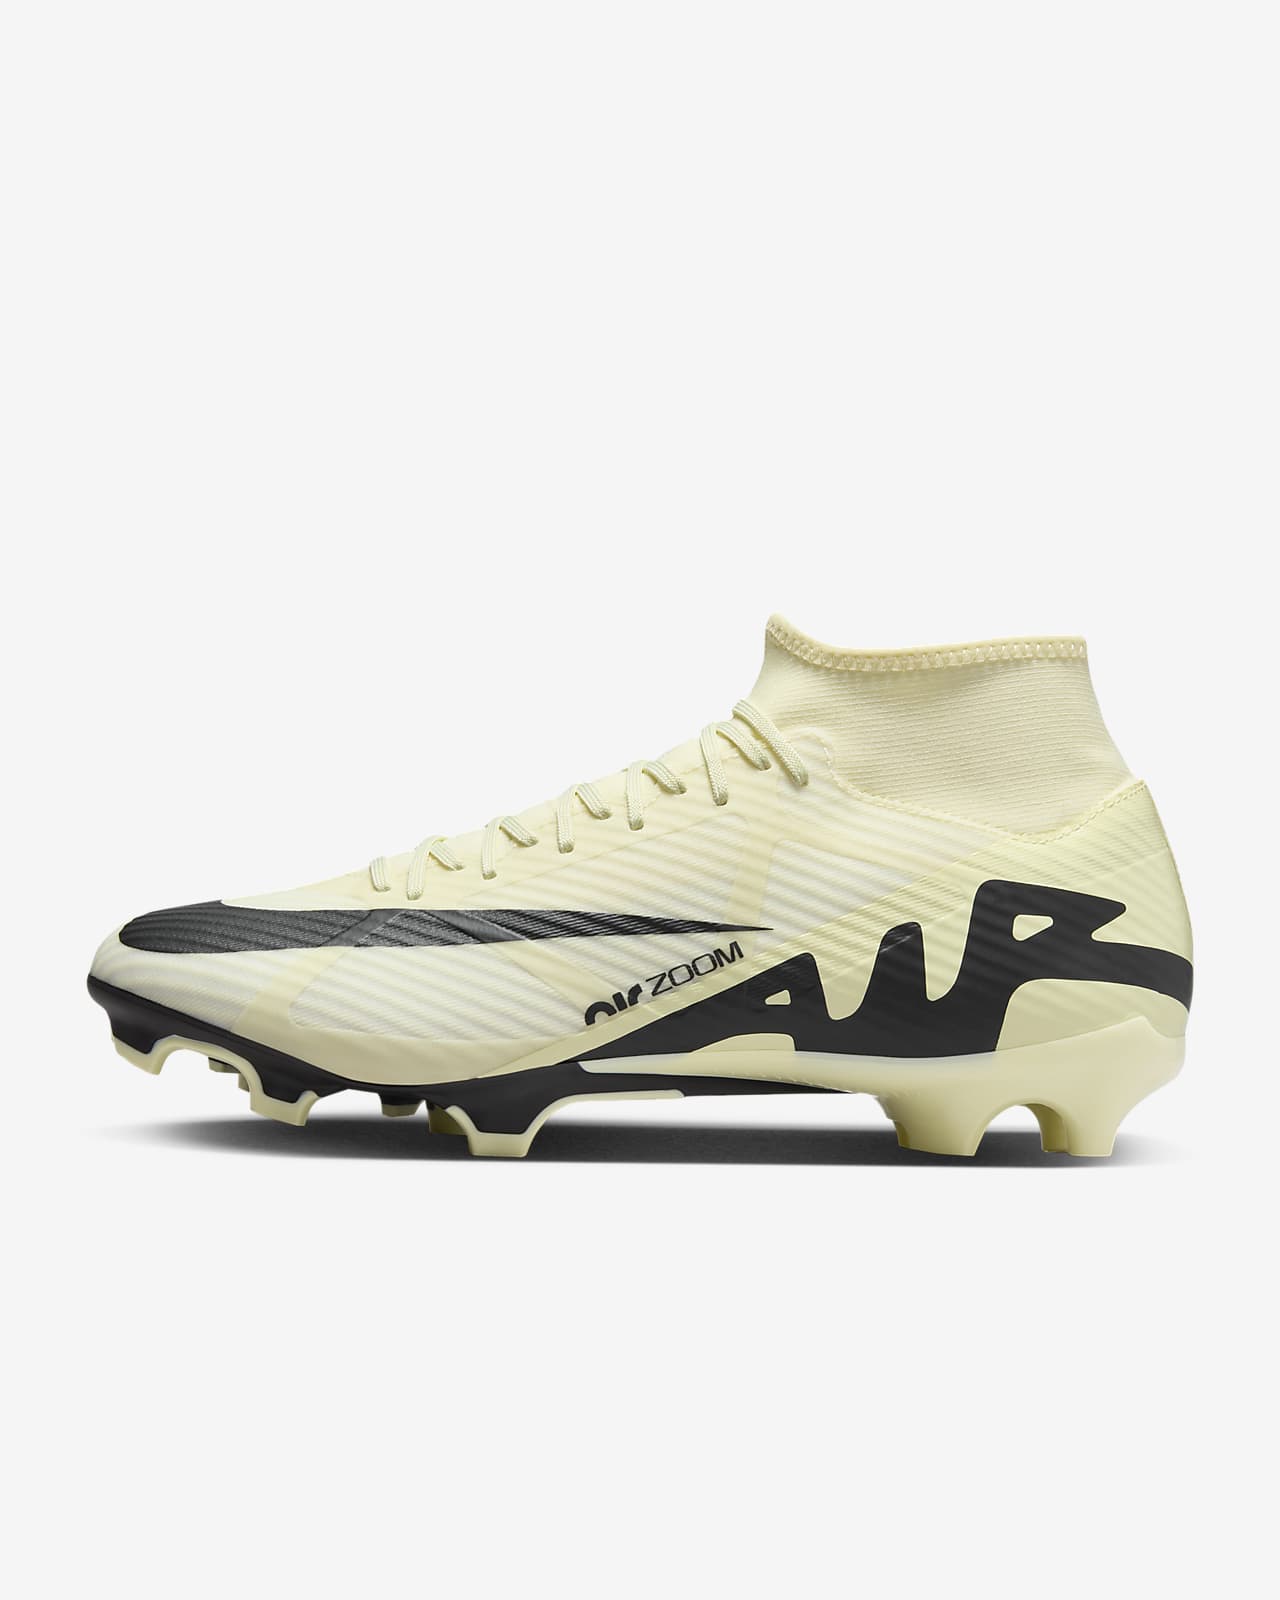 Les meilleures chaussures à crampons Nike Football. Nike CA